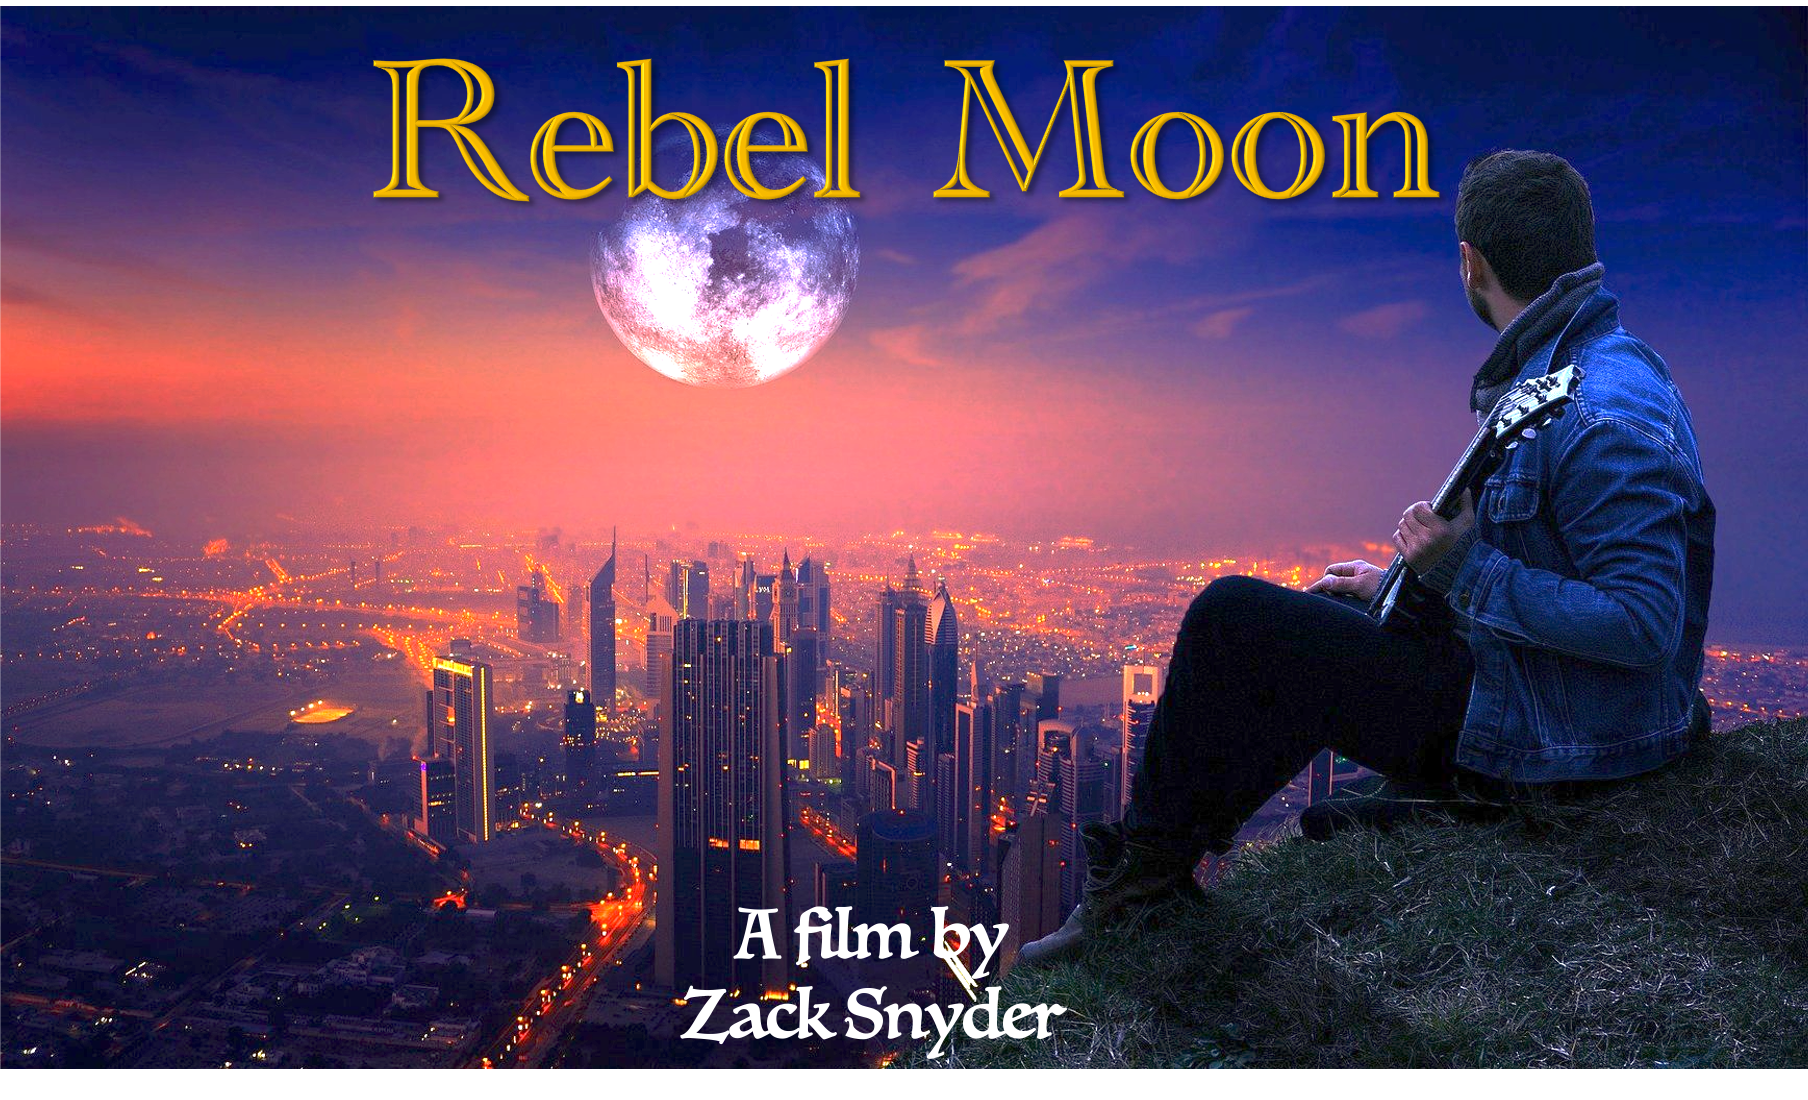 Zack Snyder Announces Rebel Moon Early Release